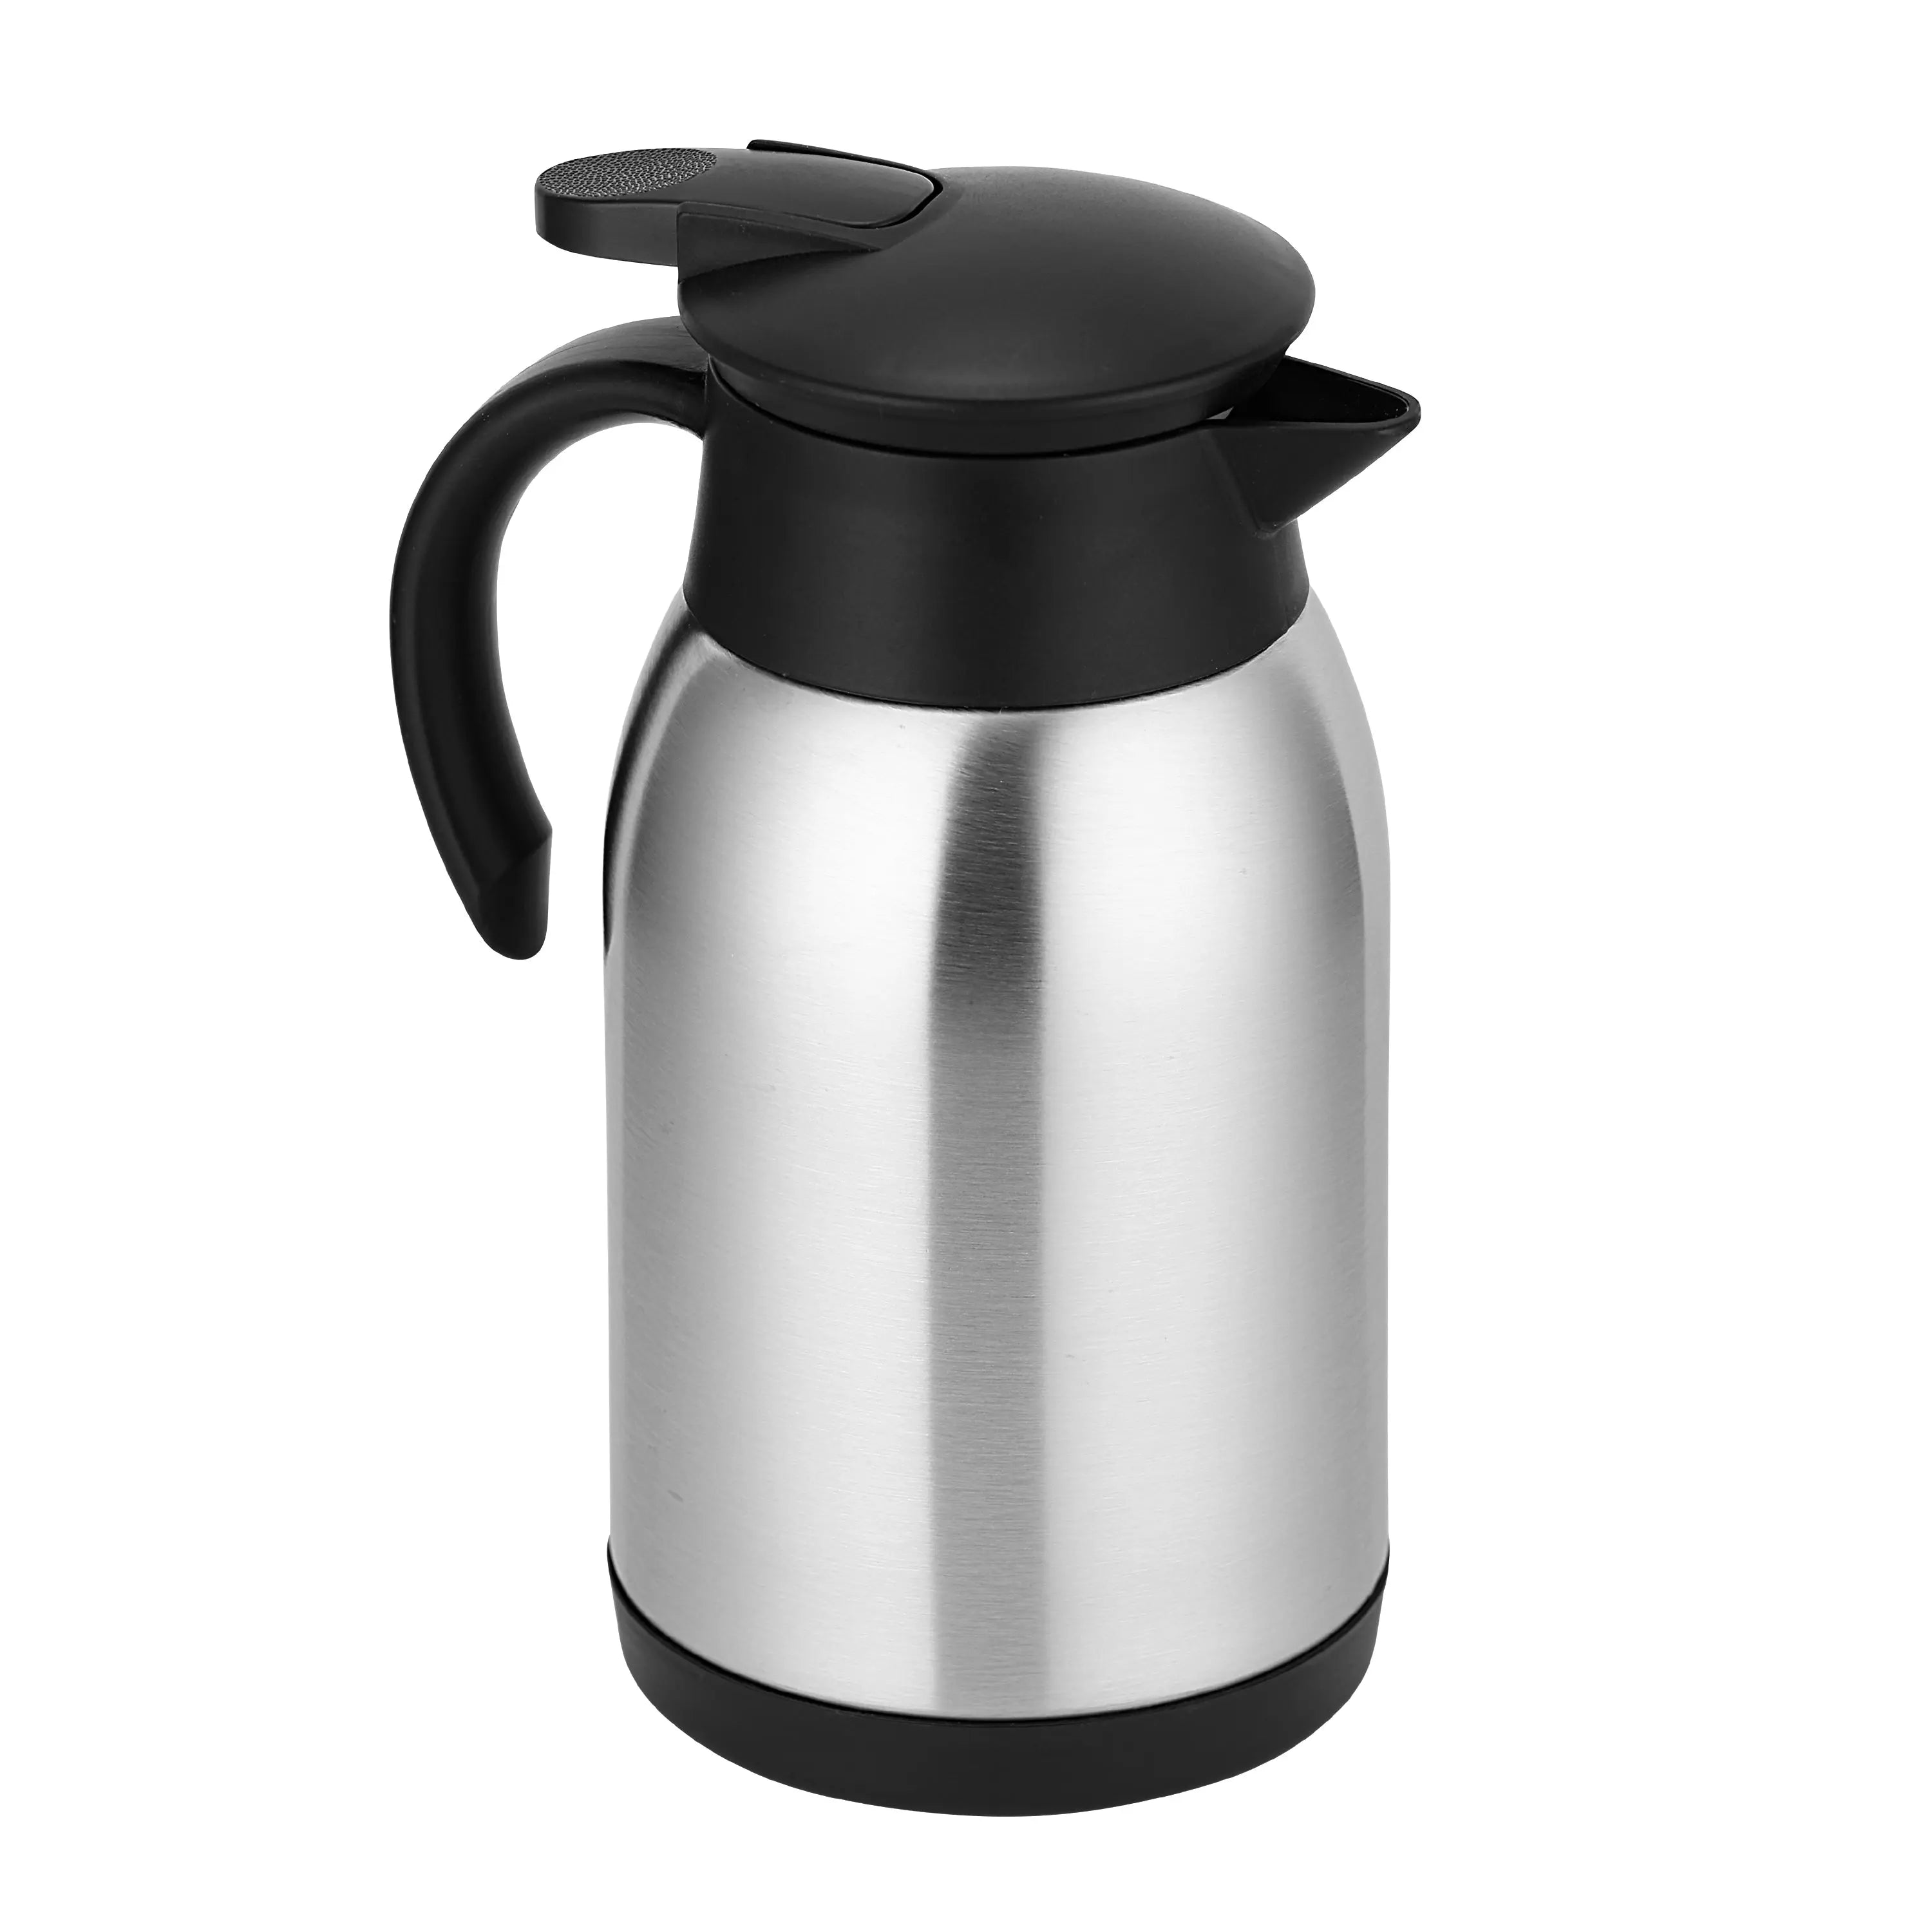 STAINLESS STEEL TEA POT HOT N COLD SIGNATURE 500 ML - CROCKERY WALA AND COMPANY 